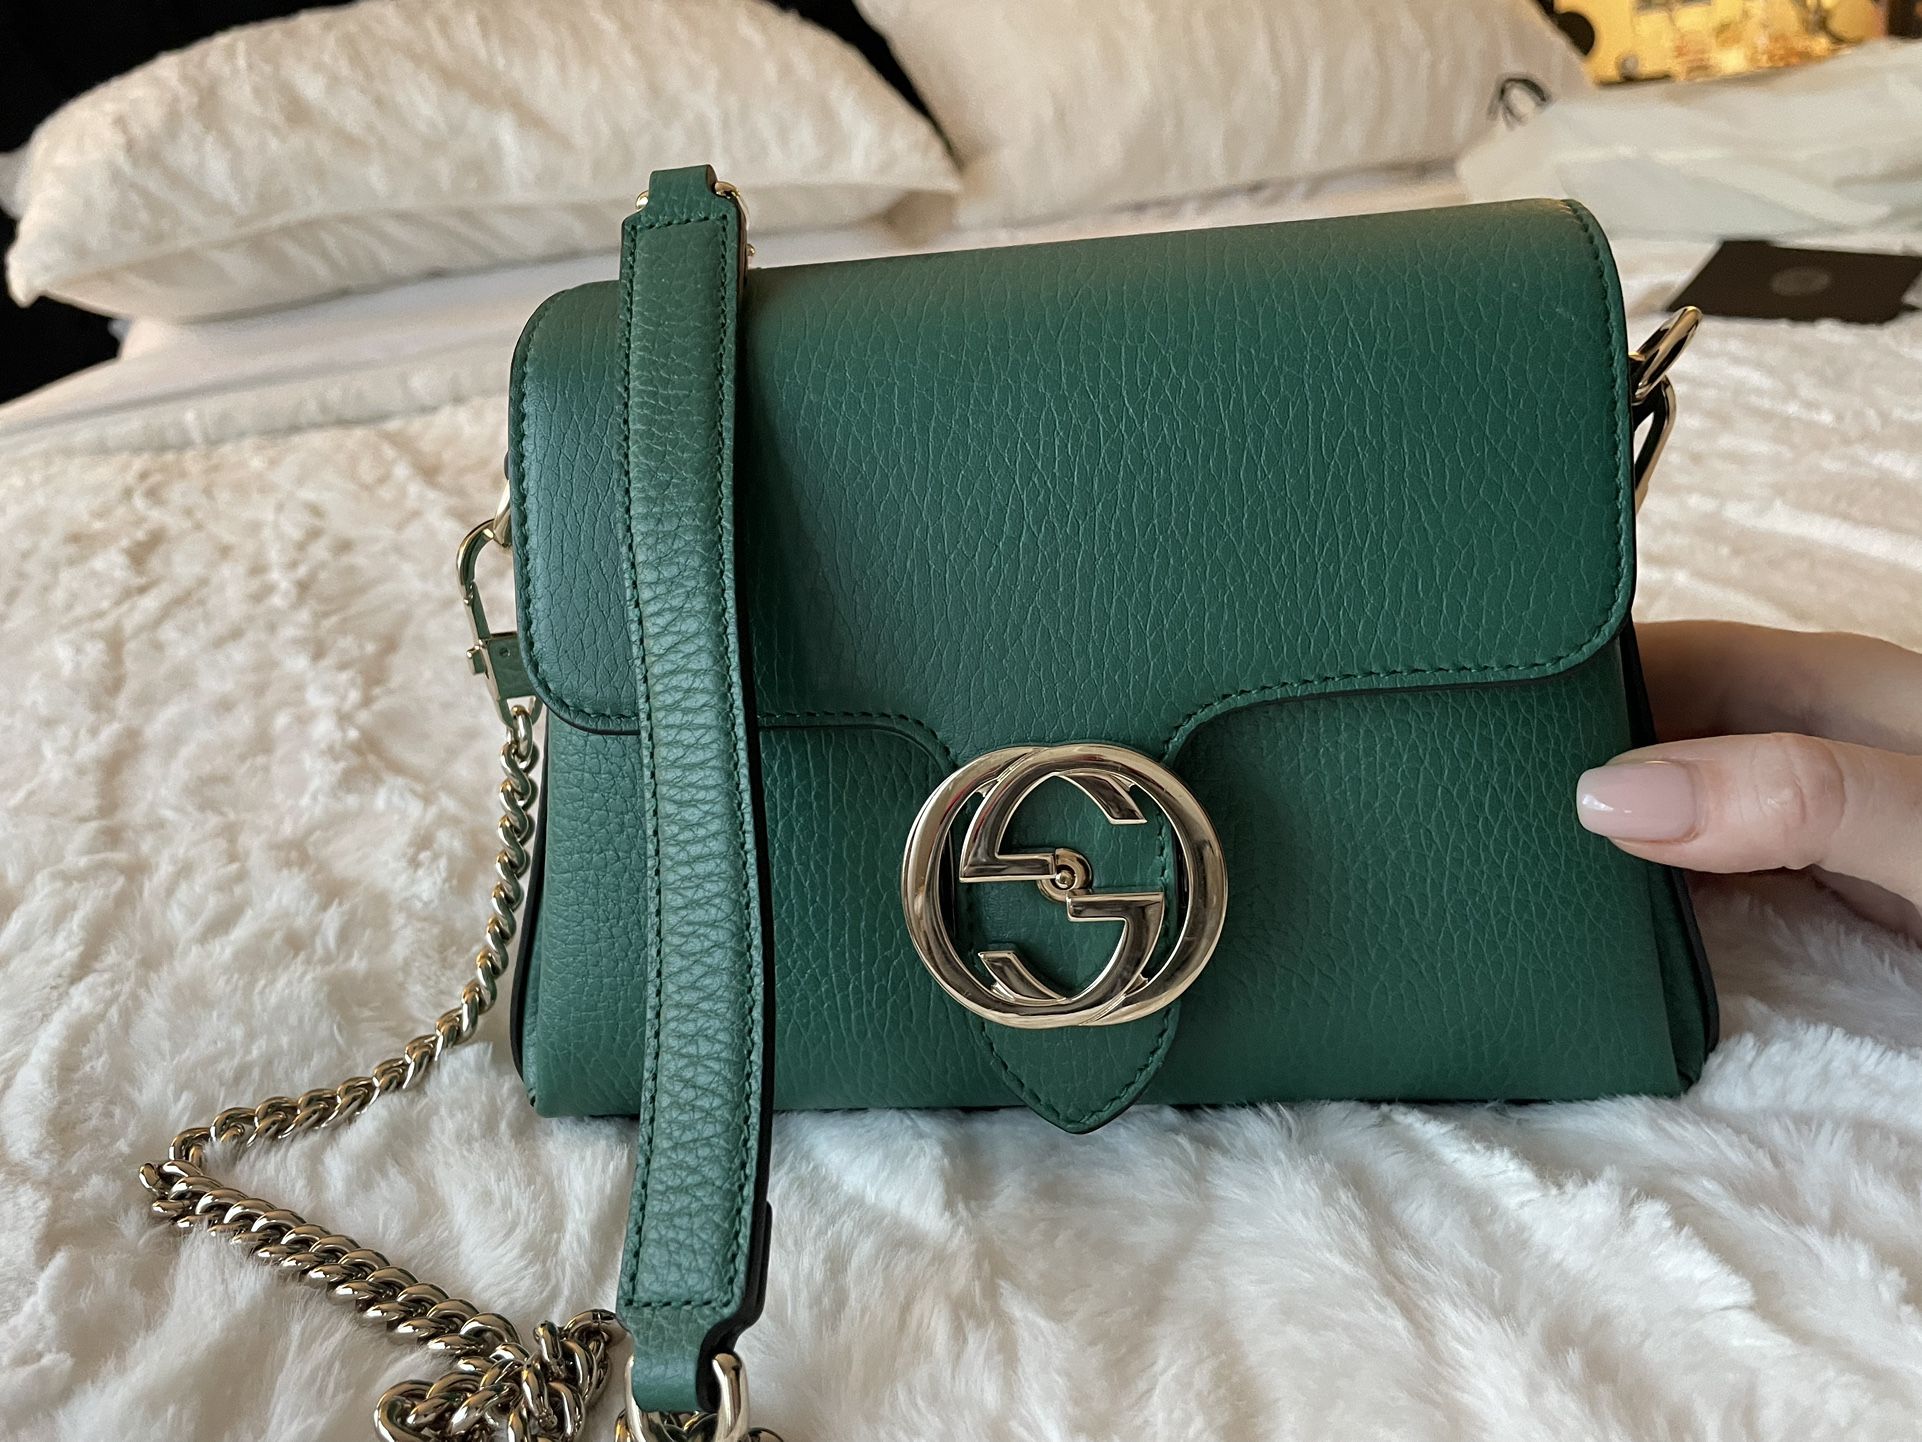 Authentic Gucci Bag - Green